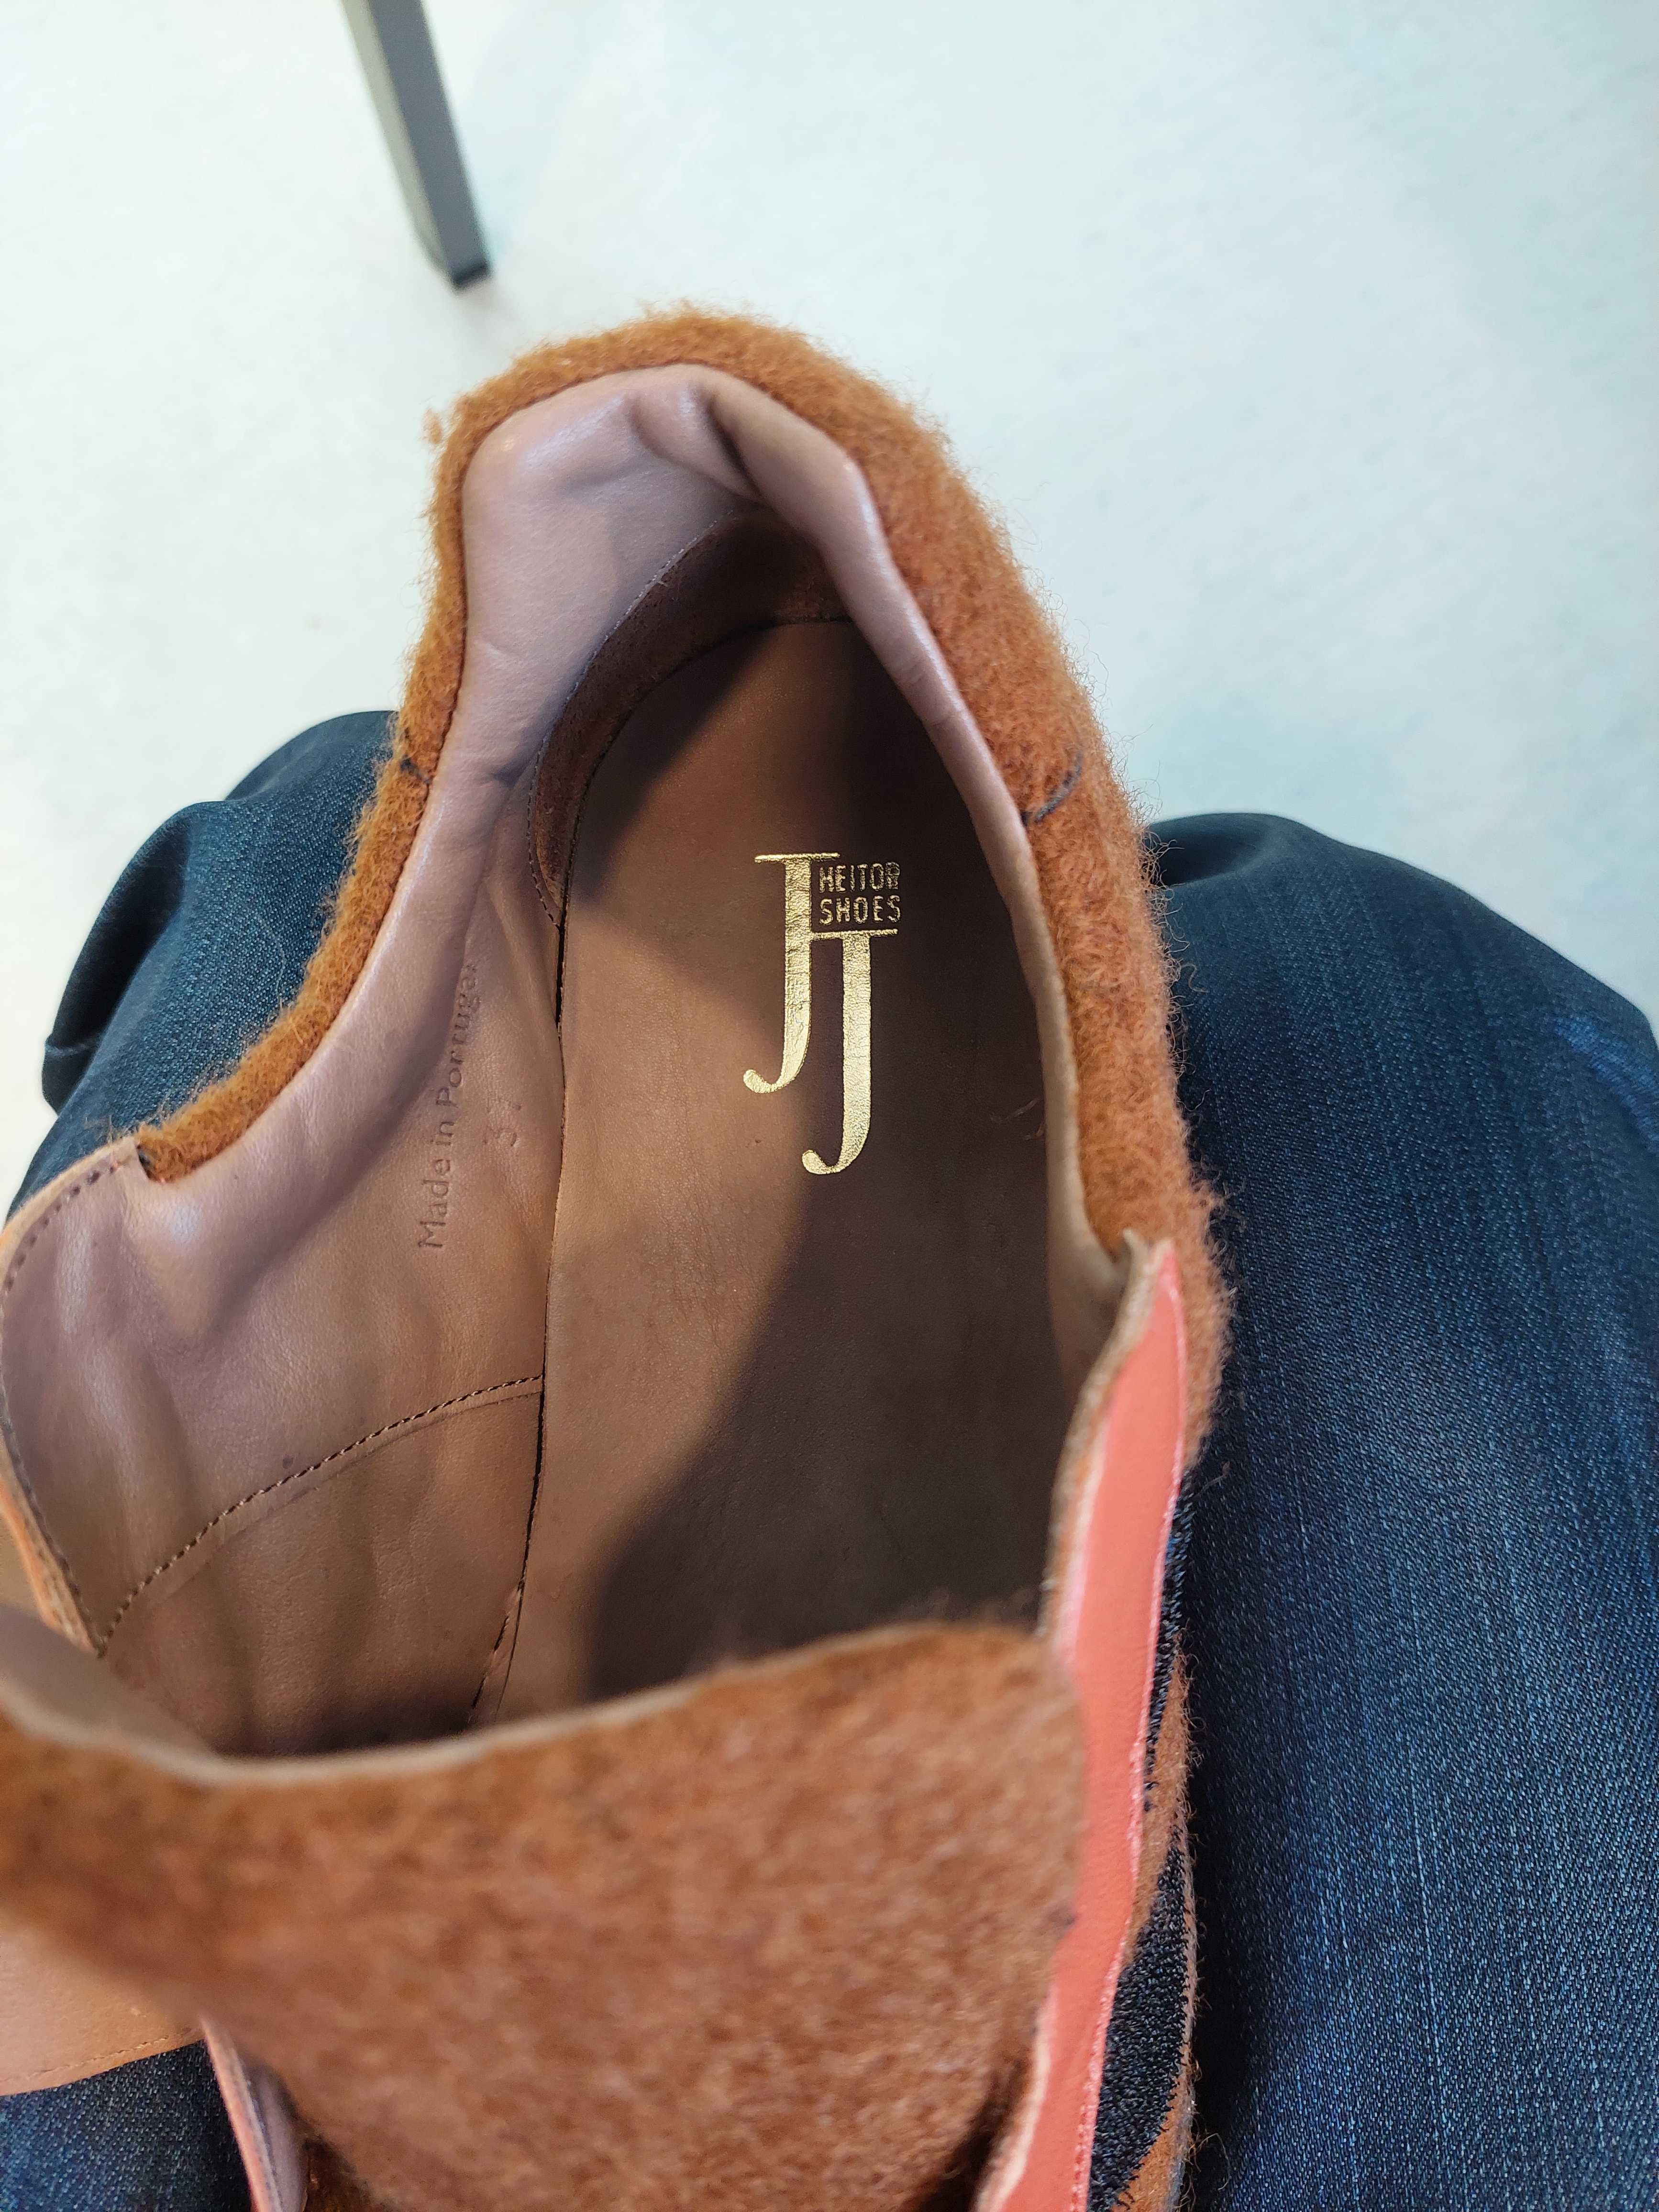 Jj heitor shoes 37